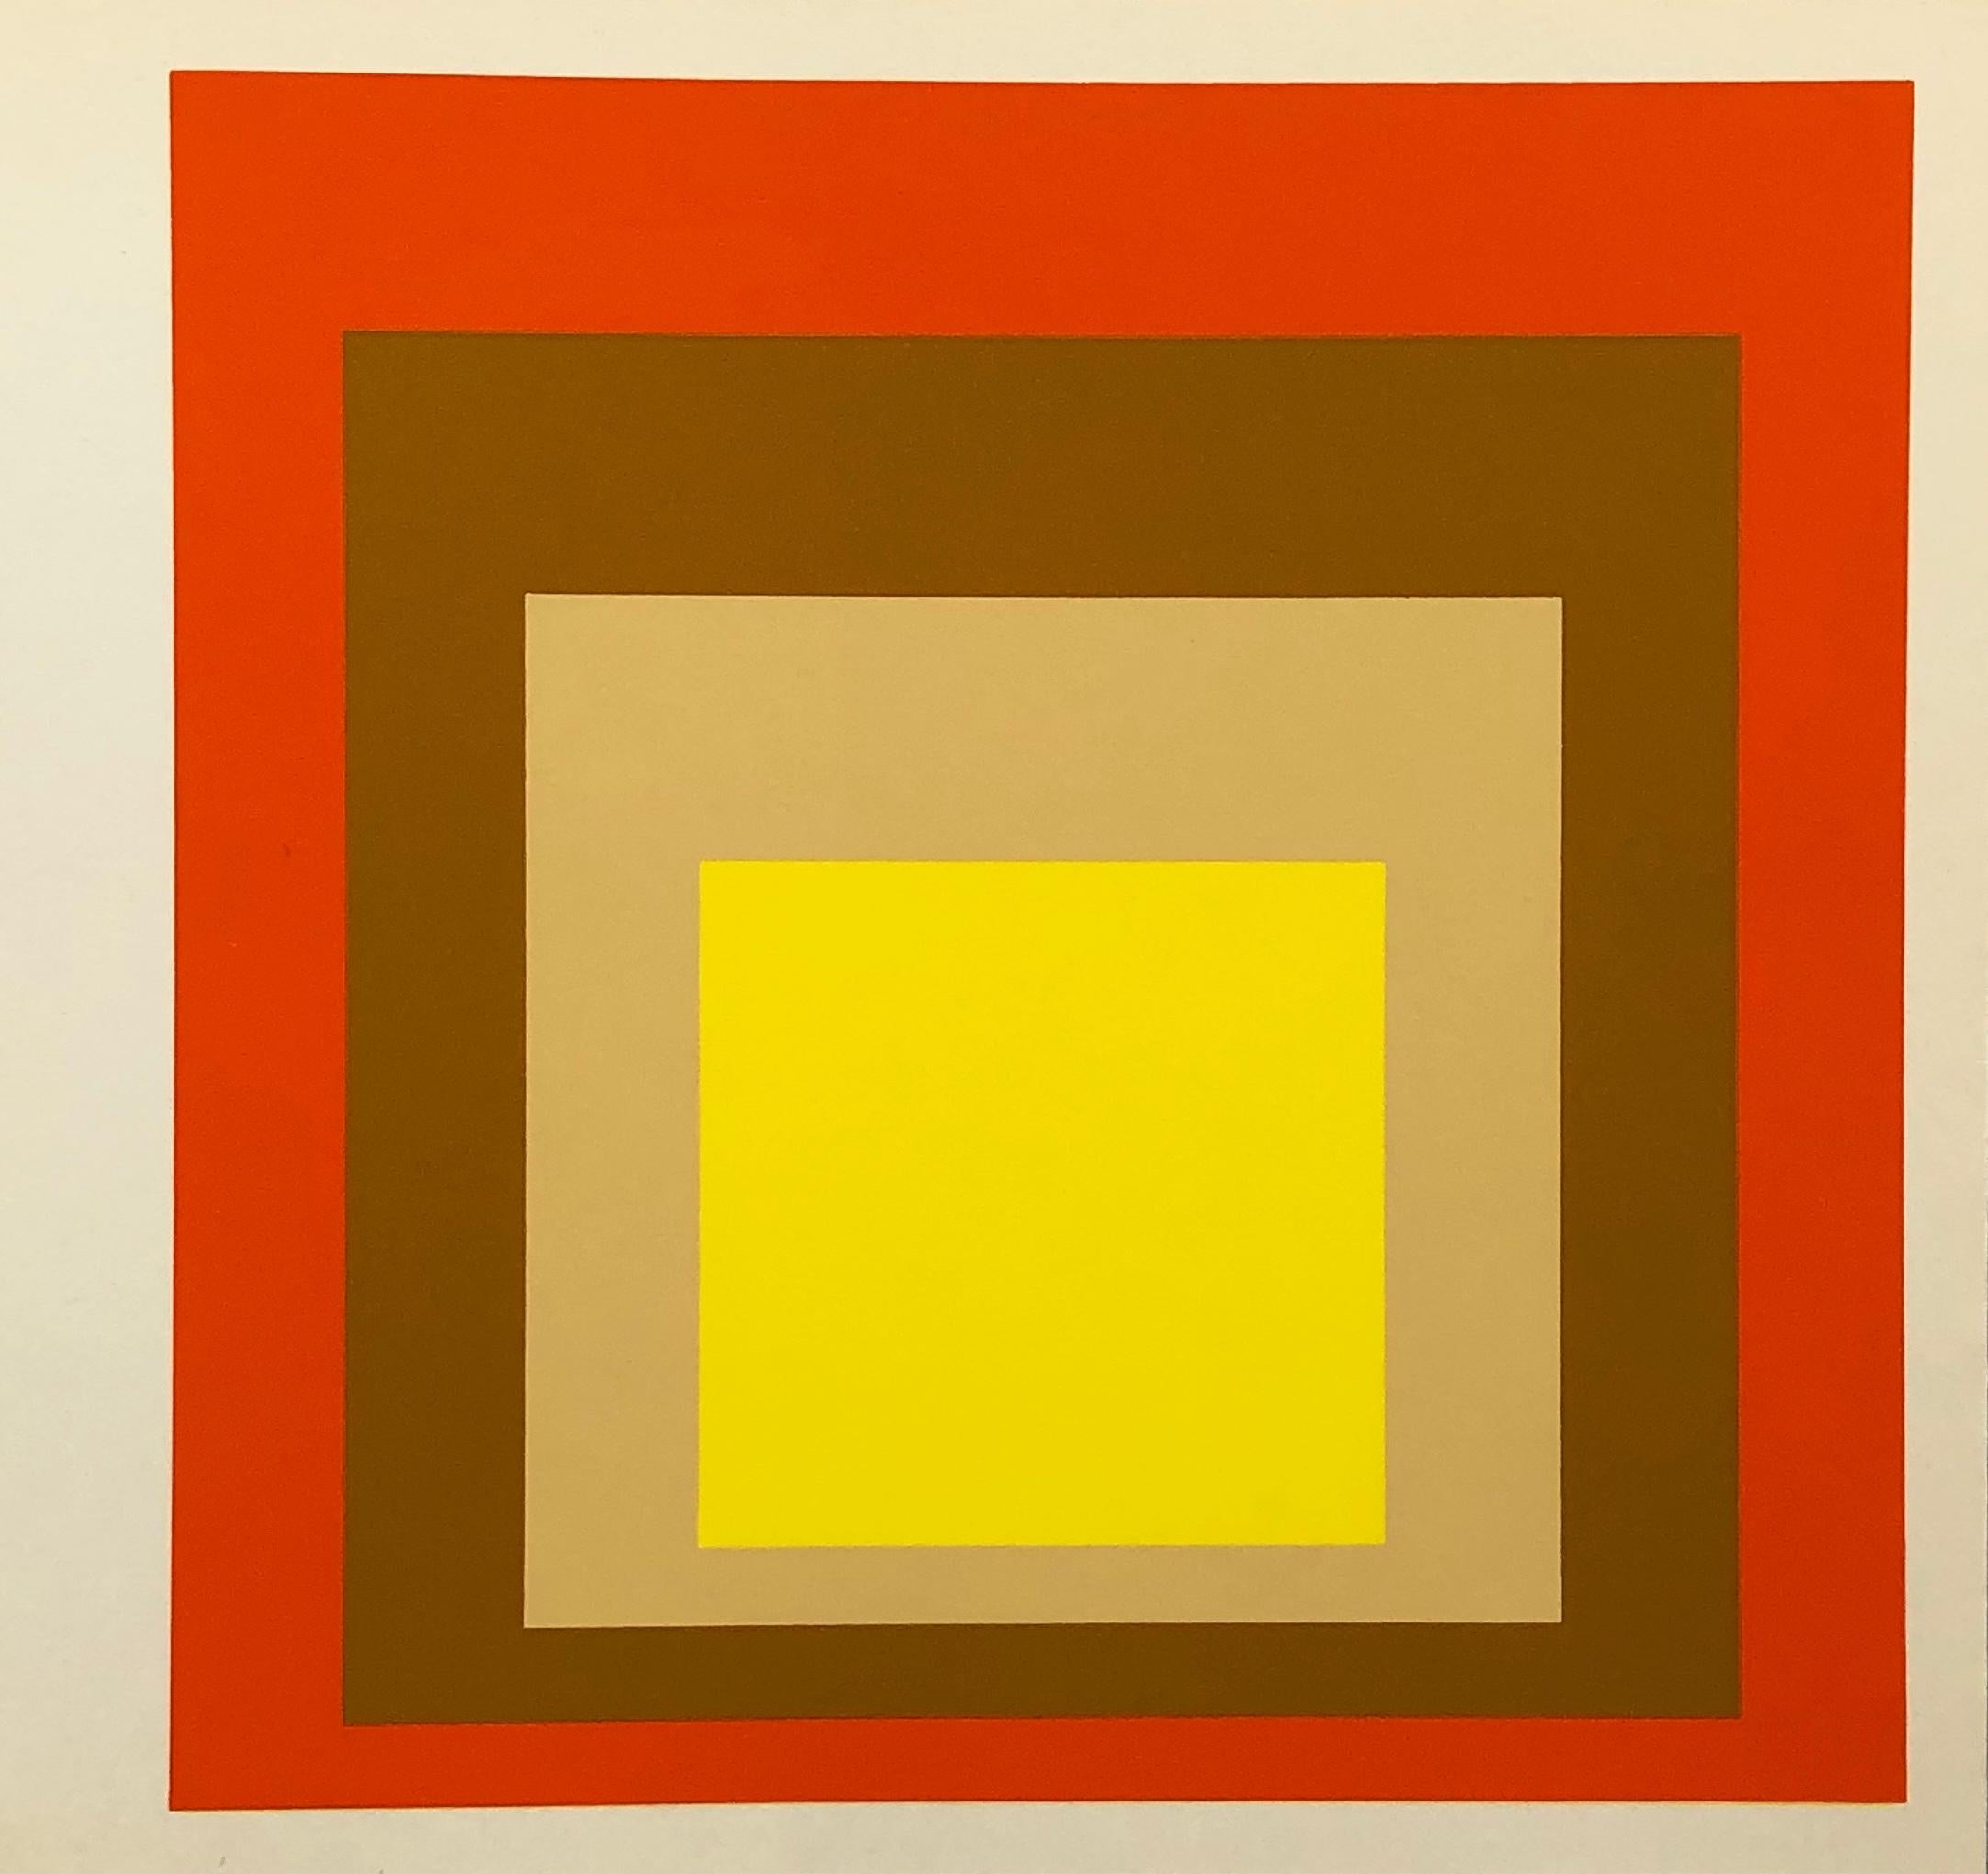 Josef Albers Homage to the Square 1977 set of 4 works (screen-printed inserts)  - Modern Print by (after) Josef Albers